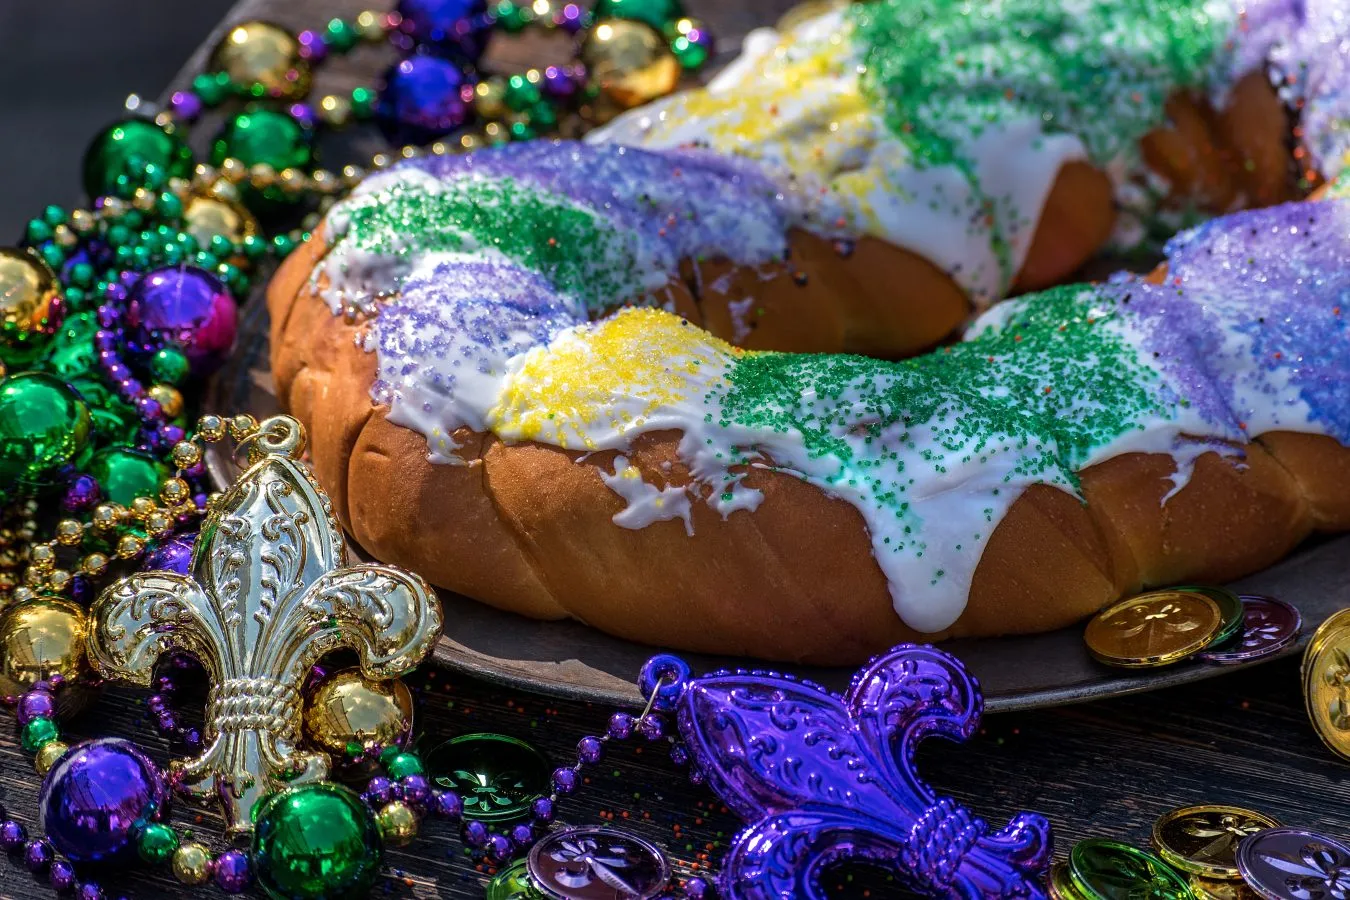 mardi gras king cake iced and surrounded by mardi gras beads